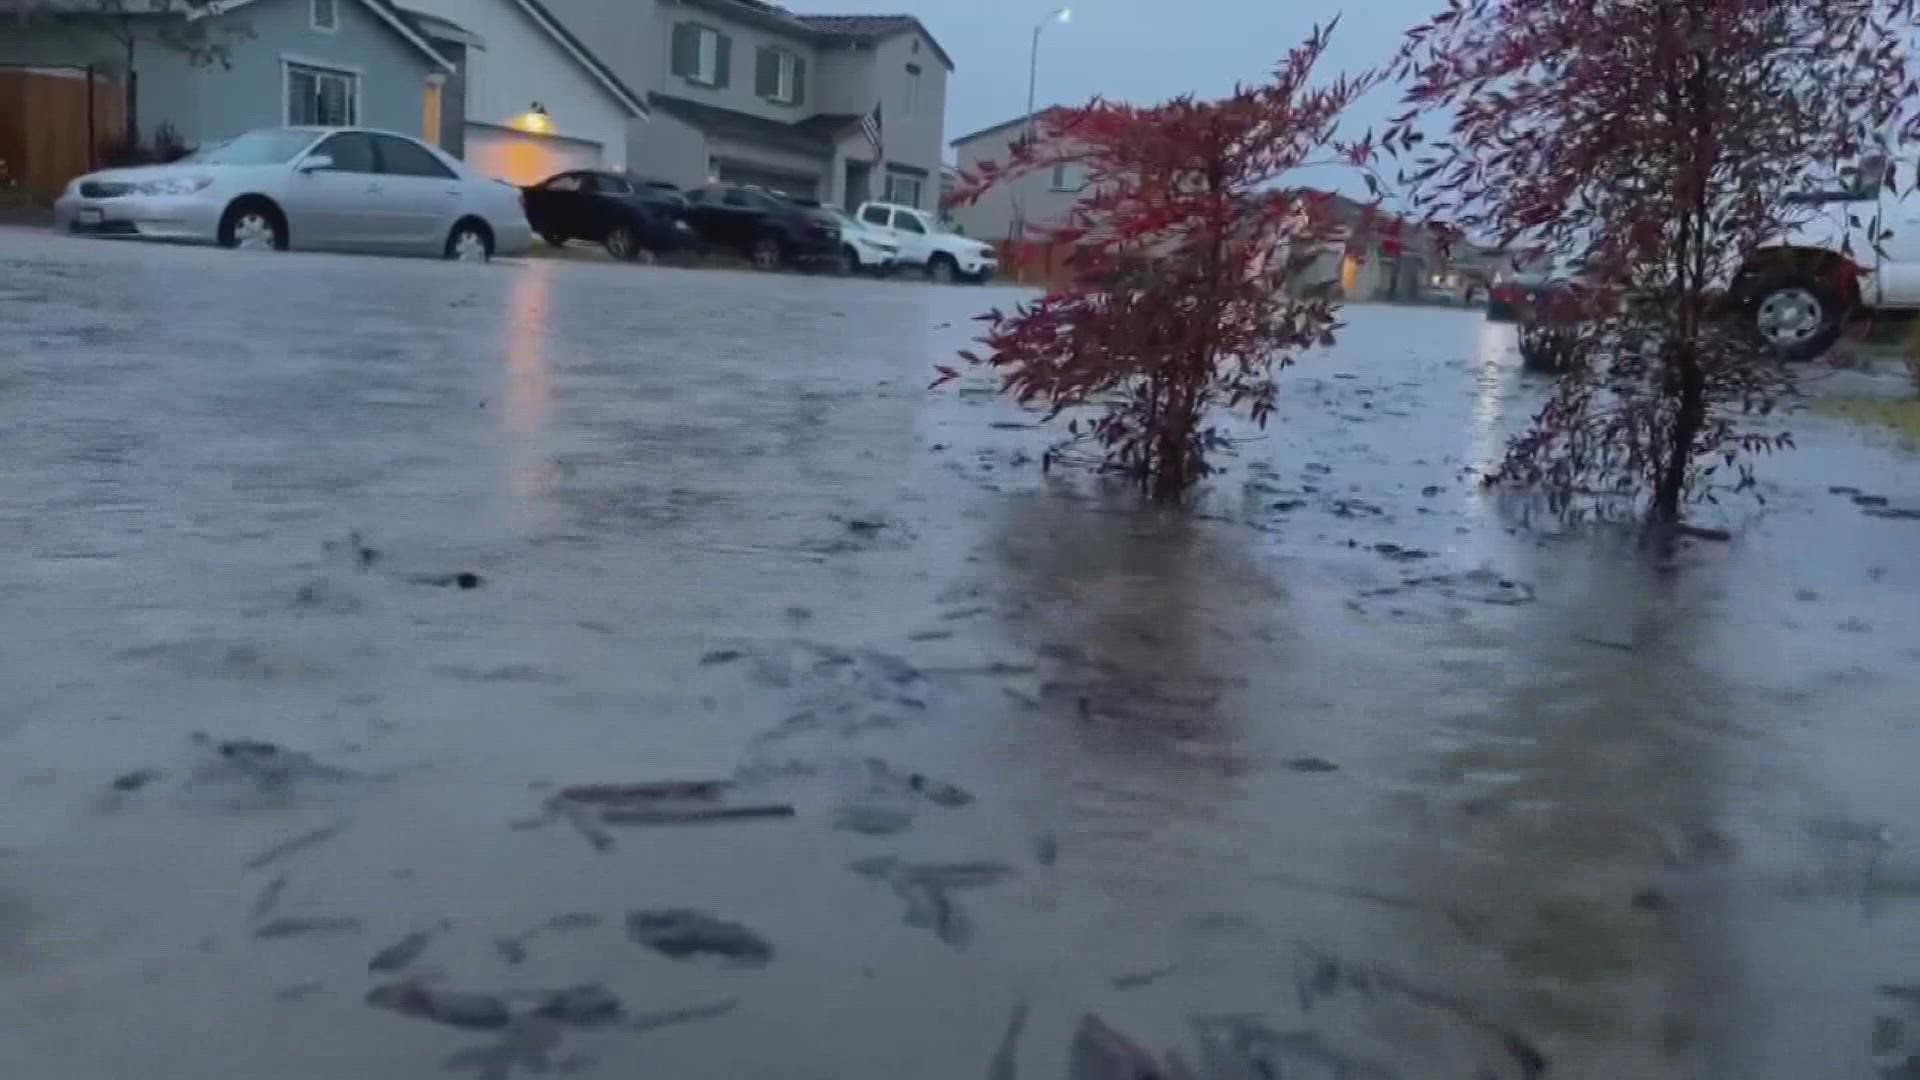 The storm has caused flooding, power outages, evacuation and shelter-in-place orders throughout Northern California, Saturday.